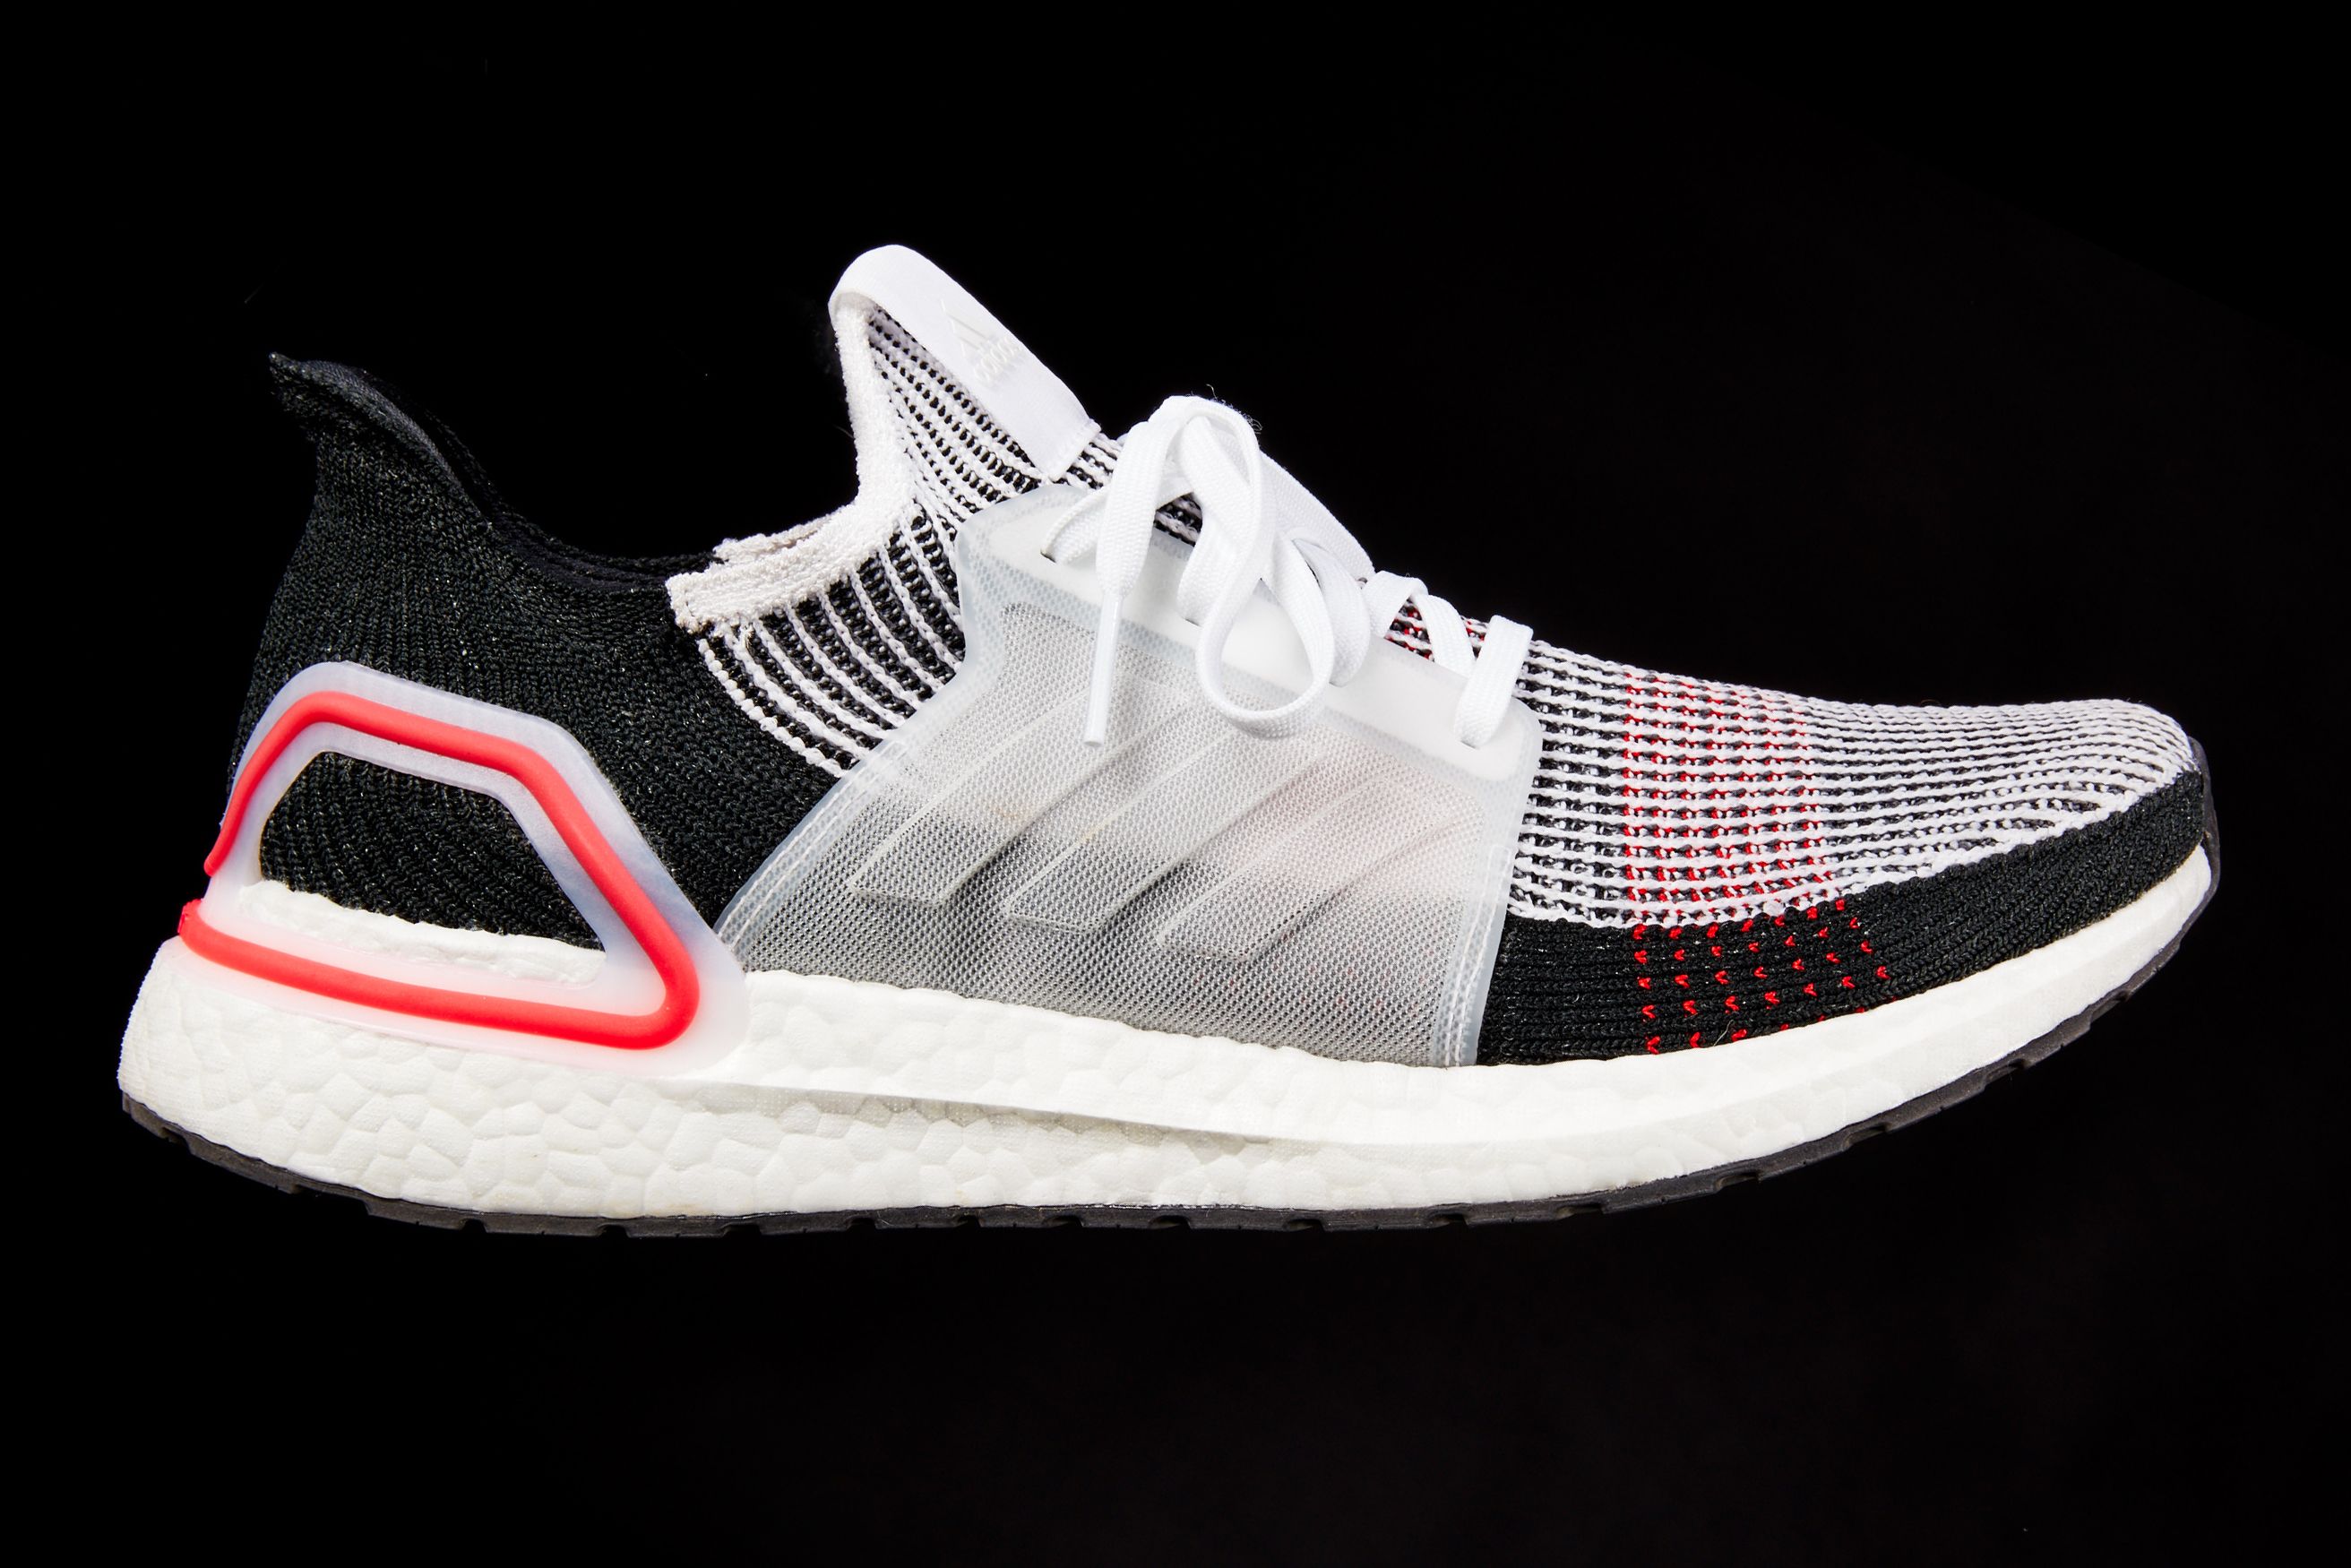 Where to Buy the New Adidas Ultra Boost 19